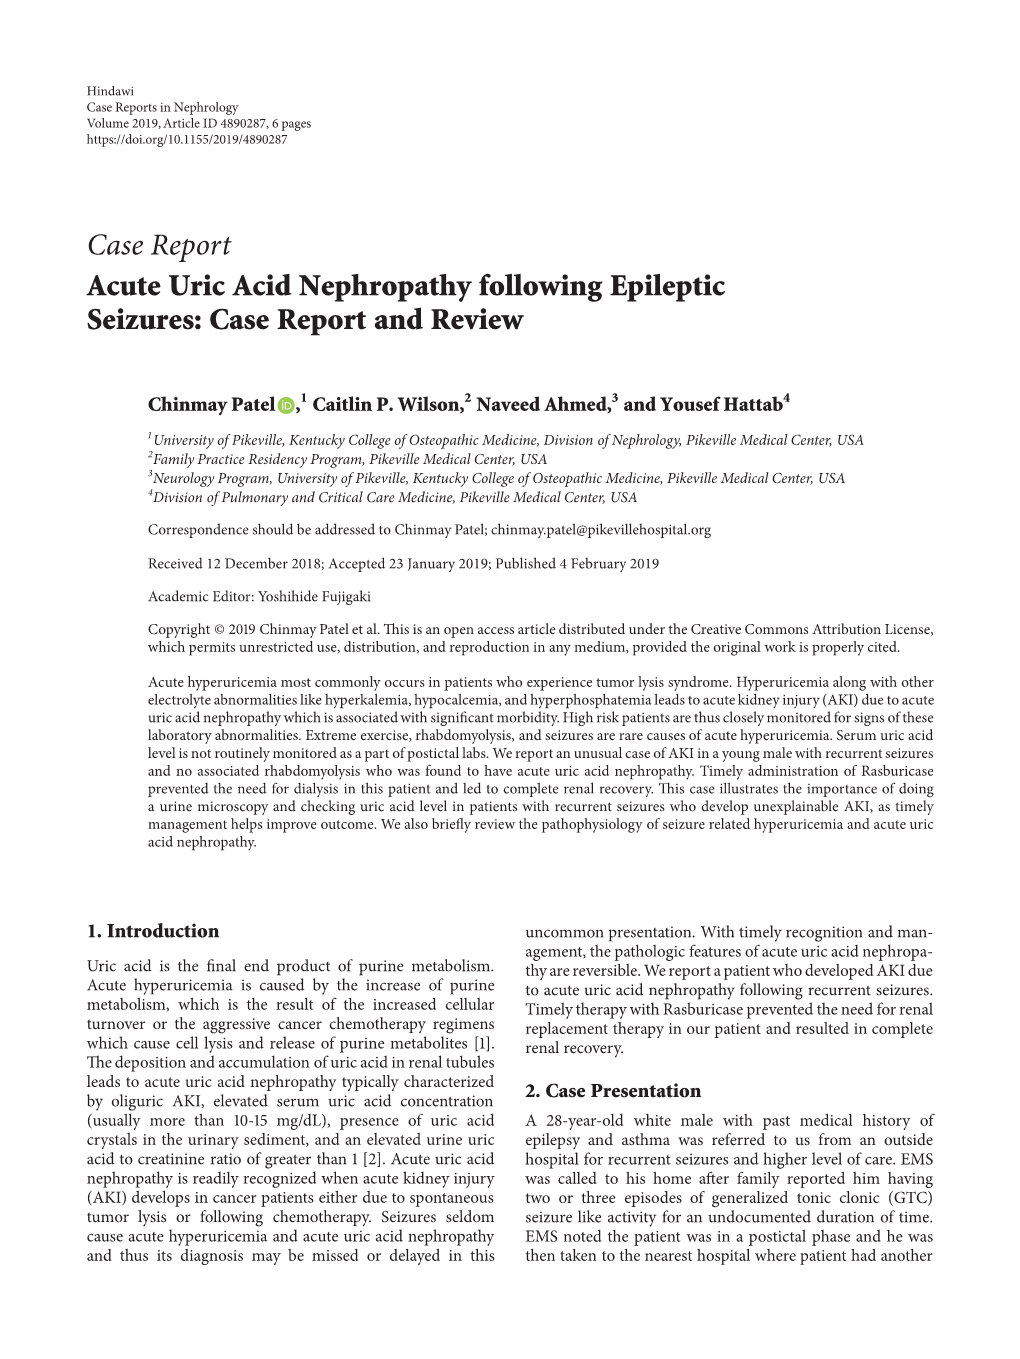 Case Report Acute Uric Acid Nephropathy Following Epileptic Seizures: Case Report and Review